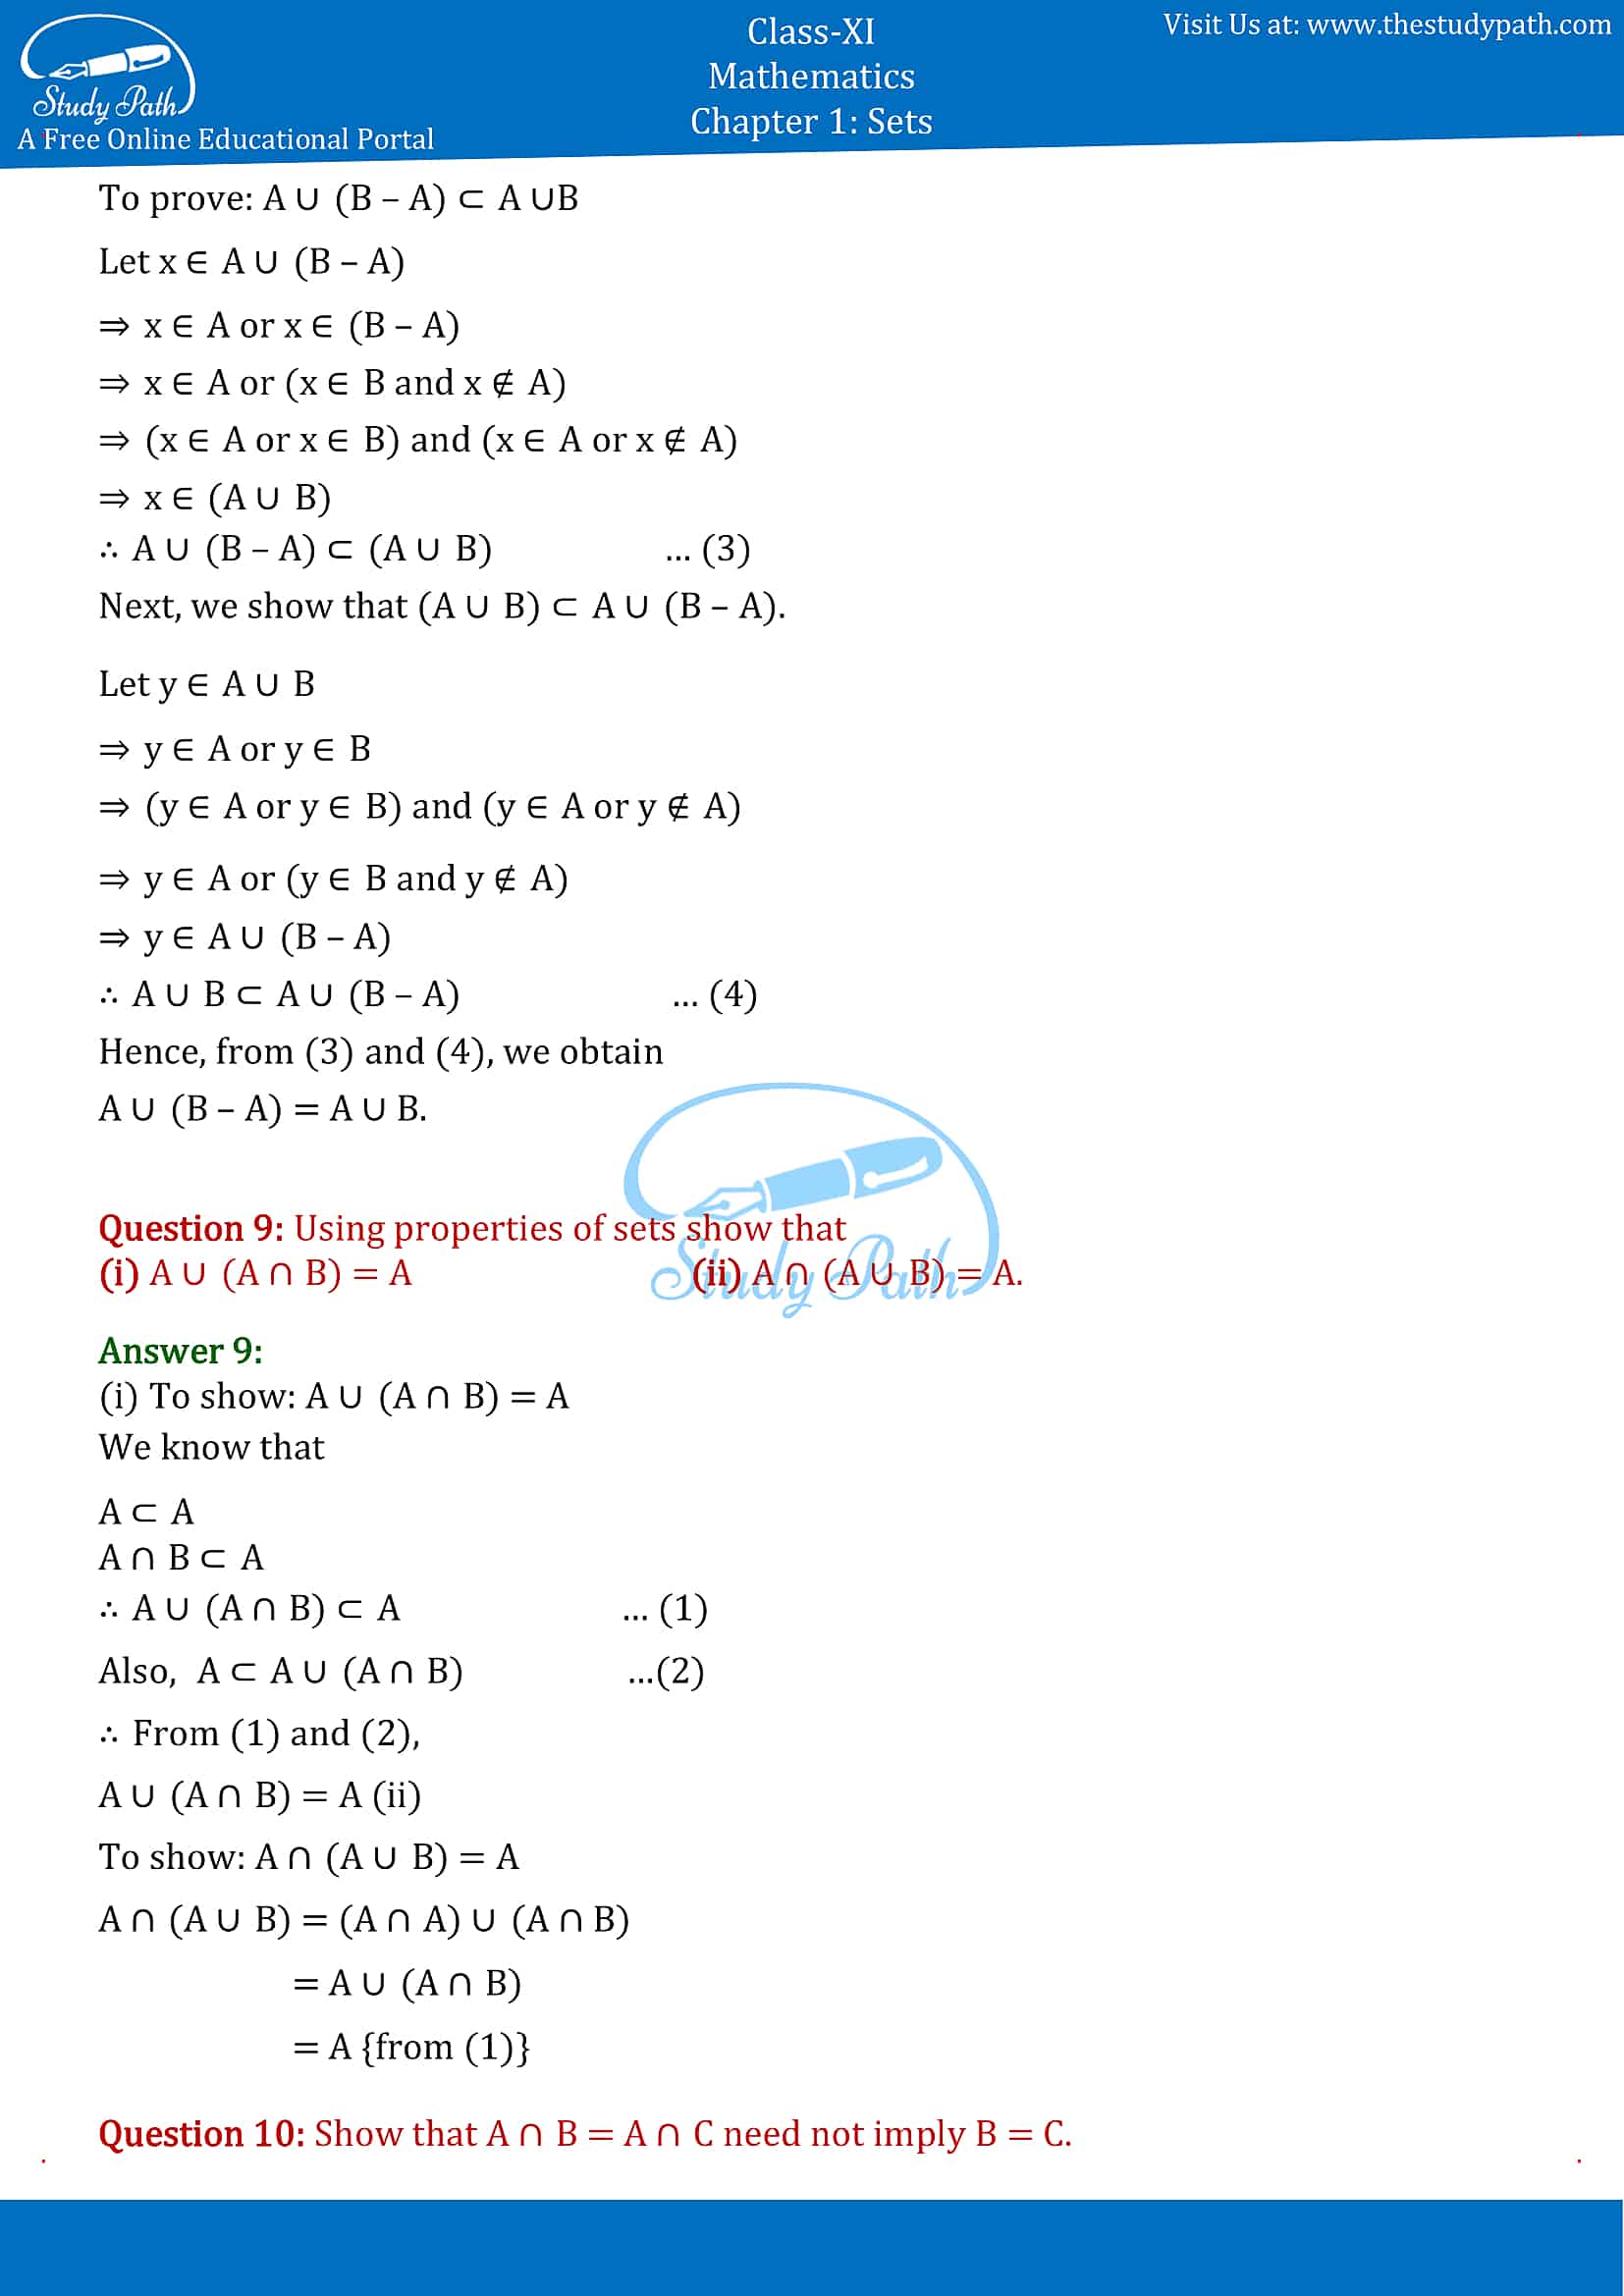 NCERT Solutions for Class 11 Maths chapter 1 sets Miscellaneous Exercise